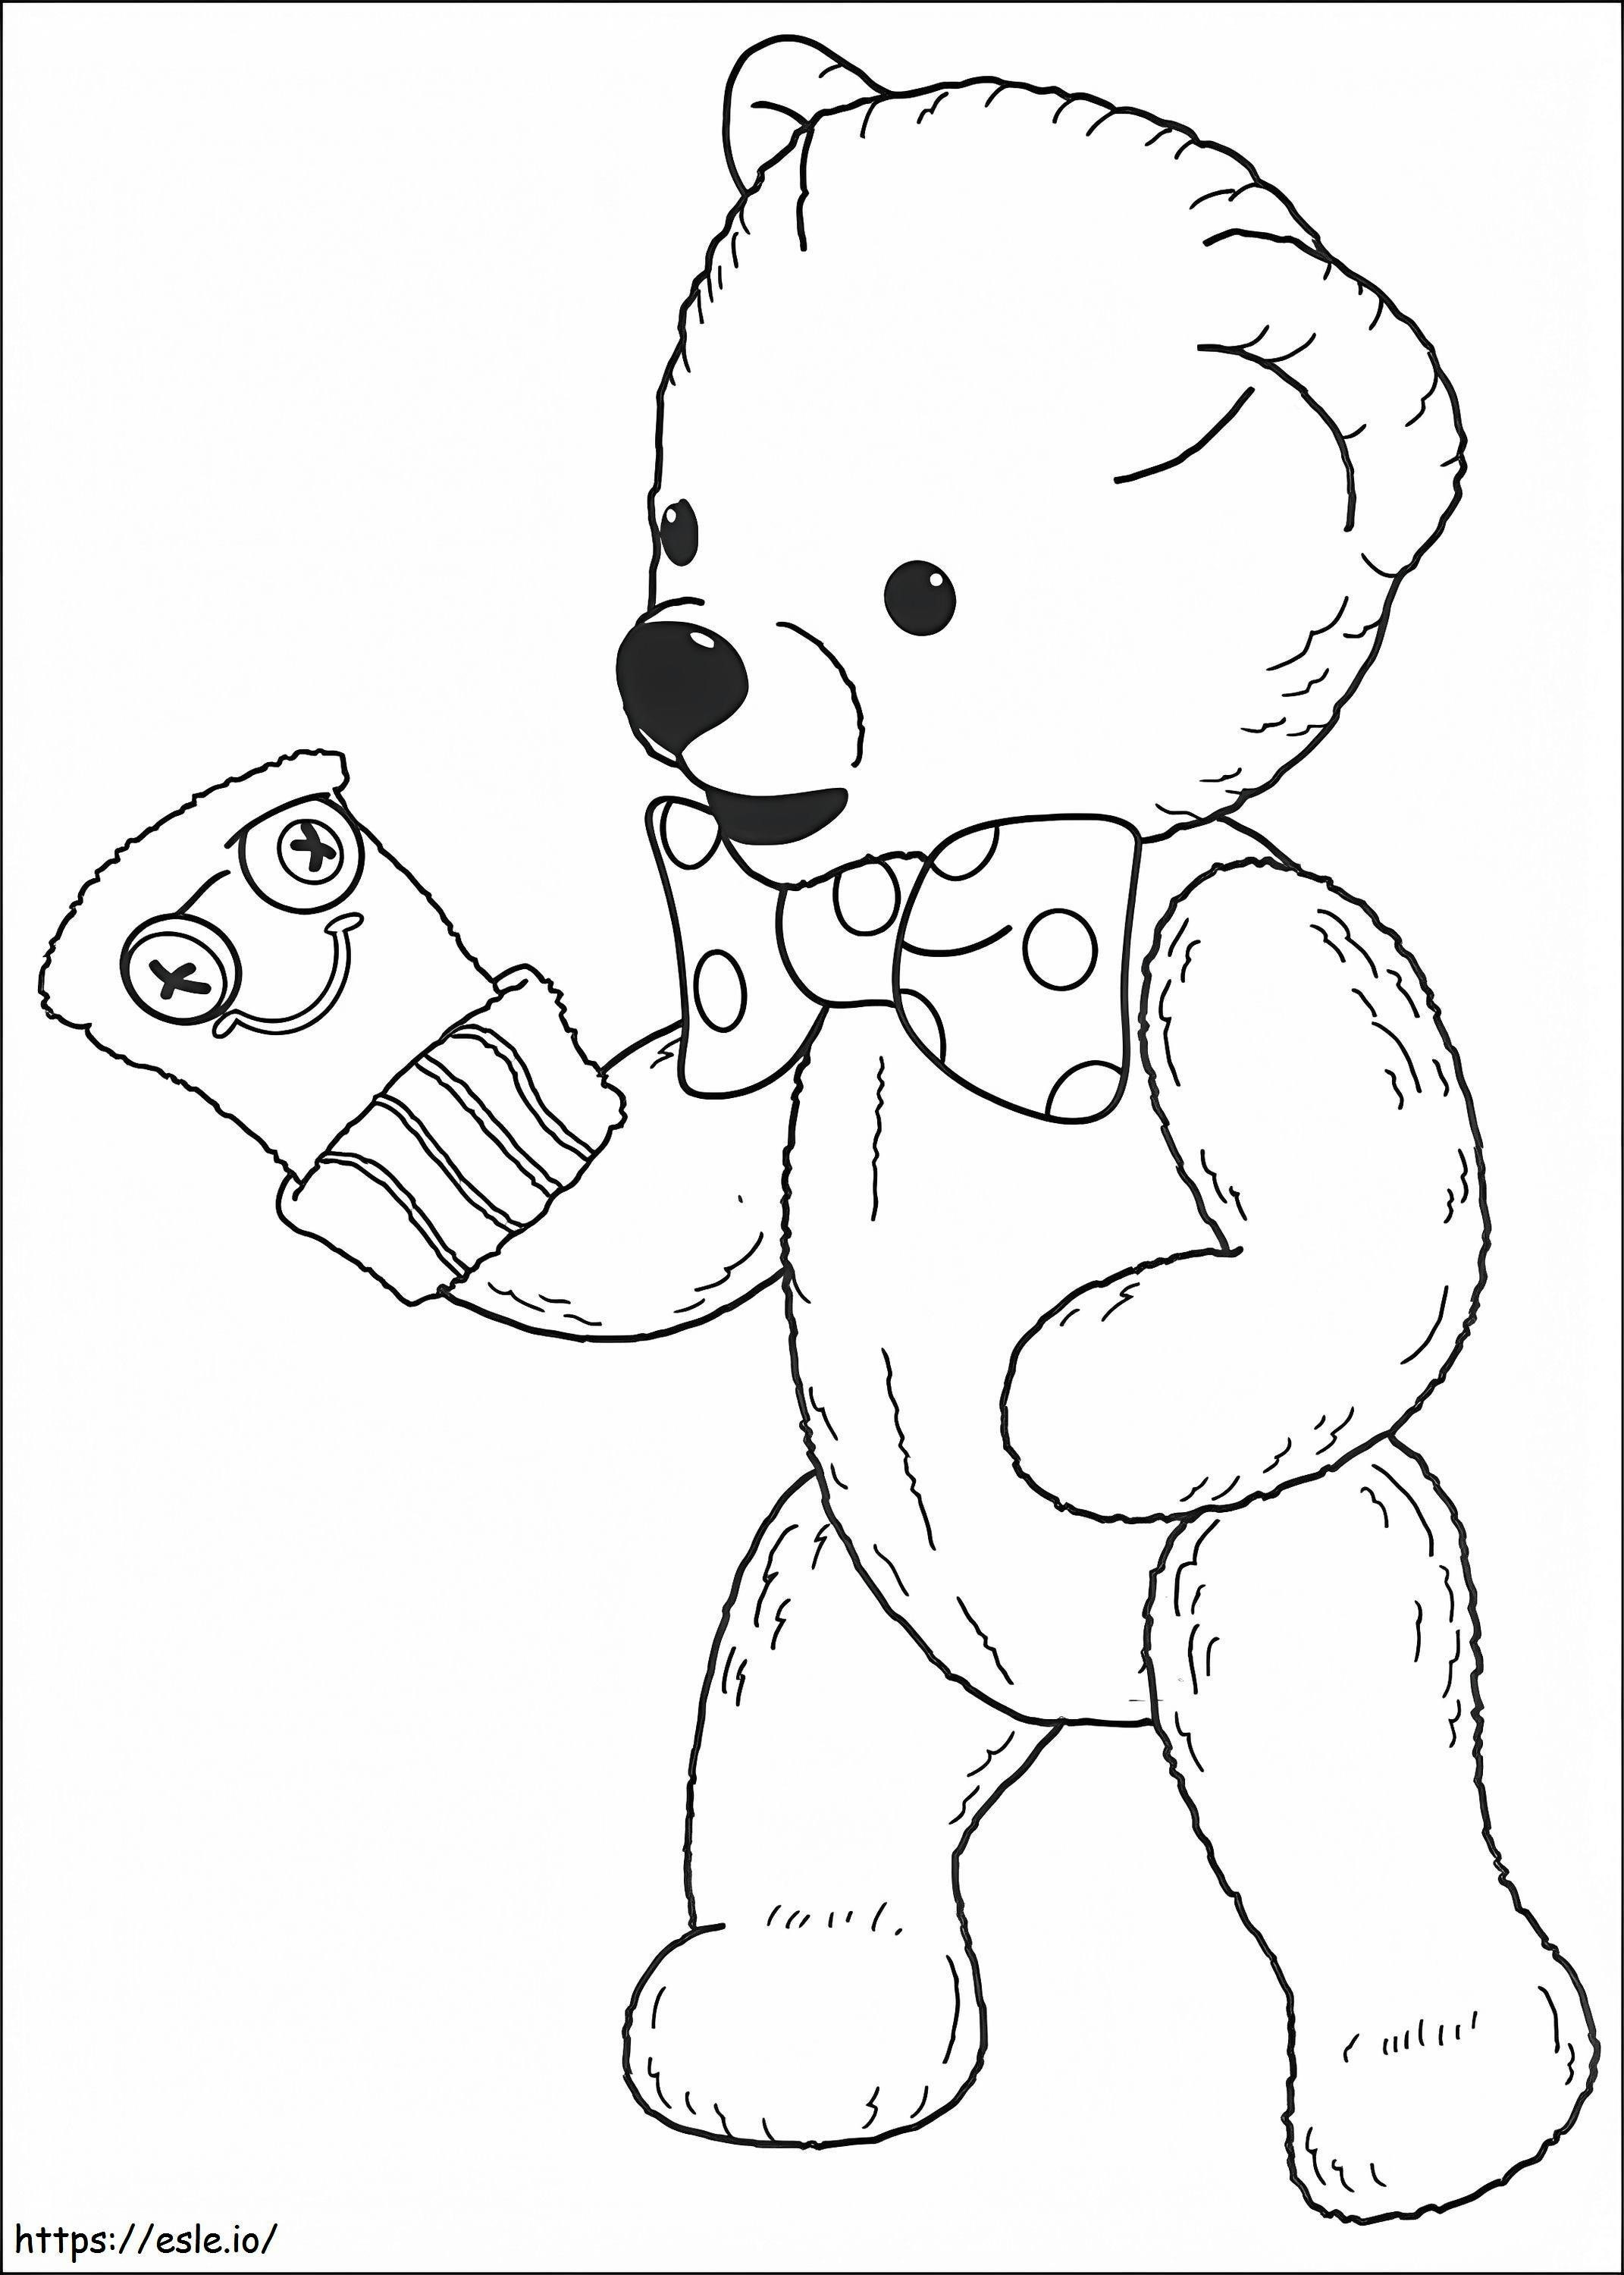 1533354988 Teddy With Puppet A4 coloring page